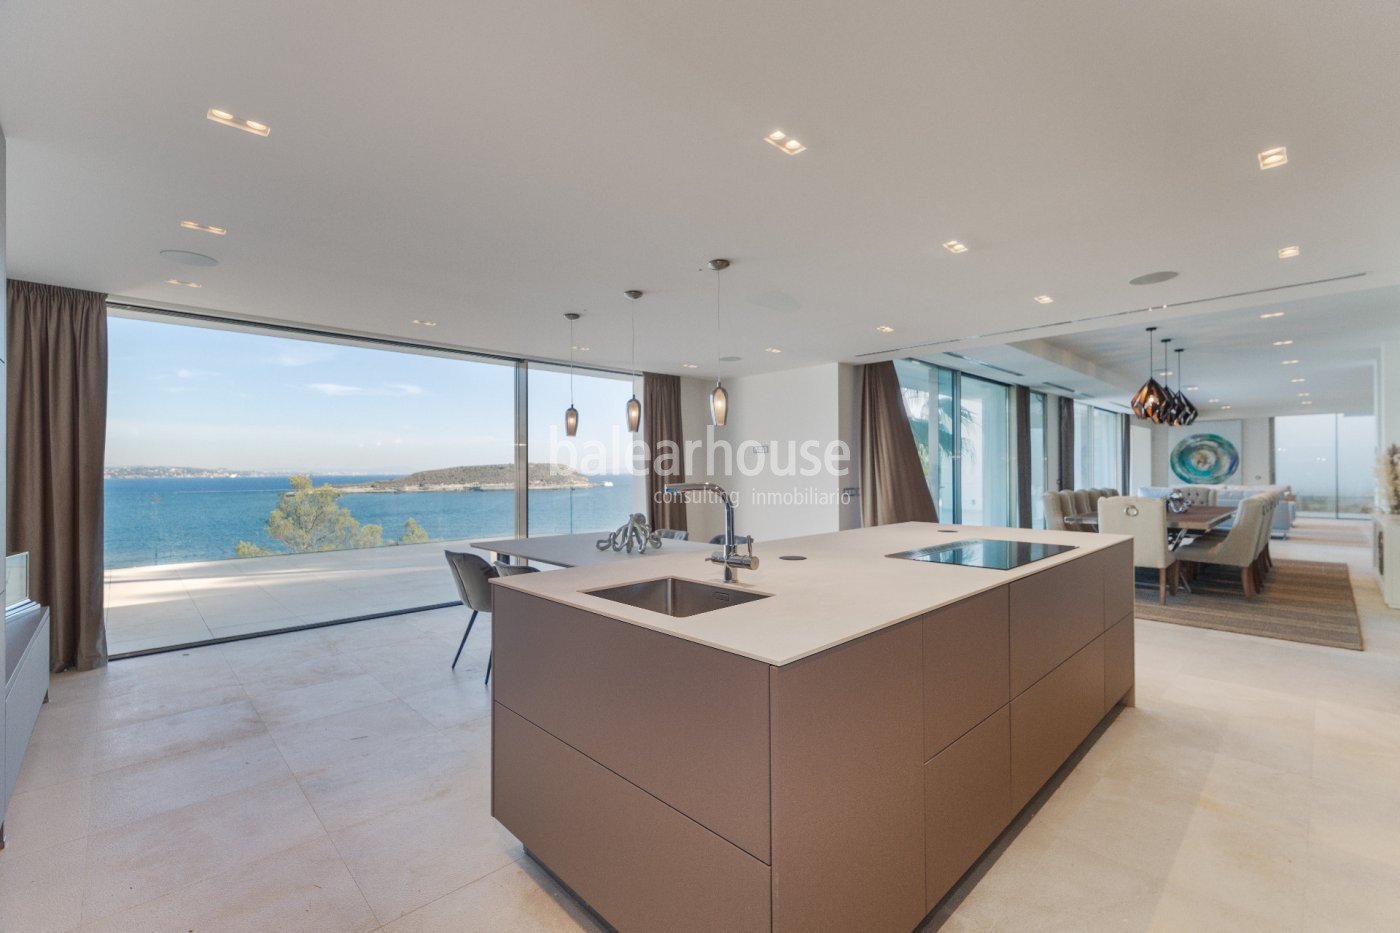 Avant-garde design and direct access to the sea in this villa located in Cala Vinyas.